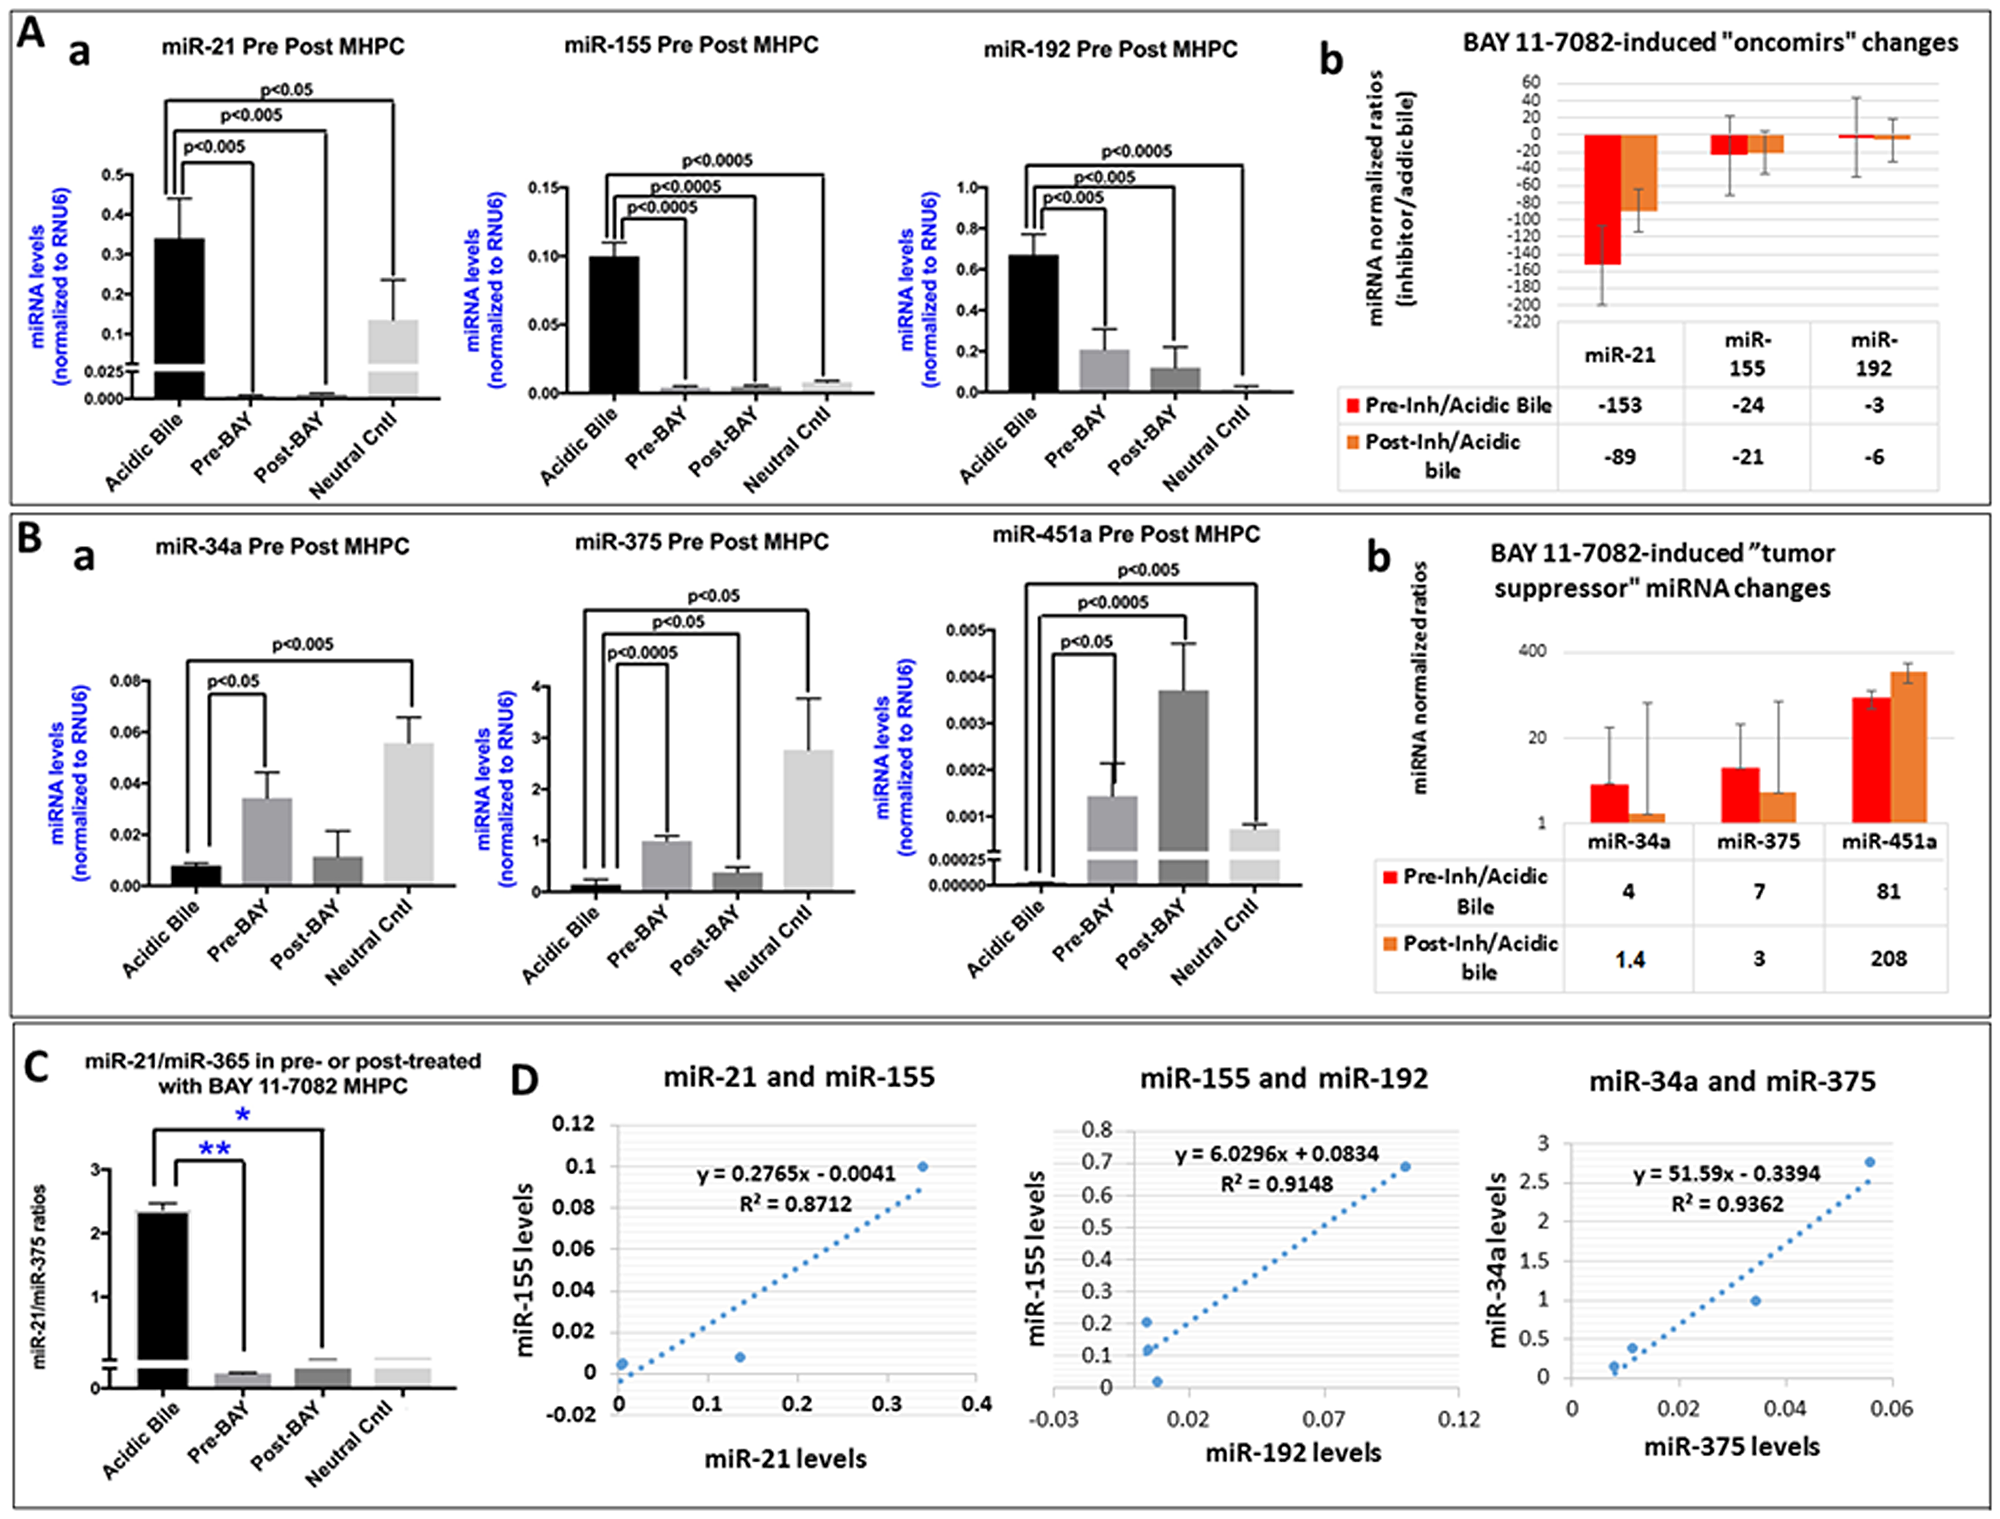 Pre- or post-application of BAY 11-7082 inhibits the acidic bile-induced deregulation of cancer-related miRNA markers, in MHPC.